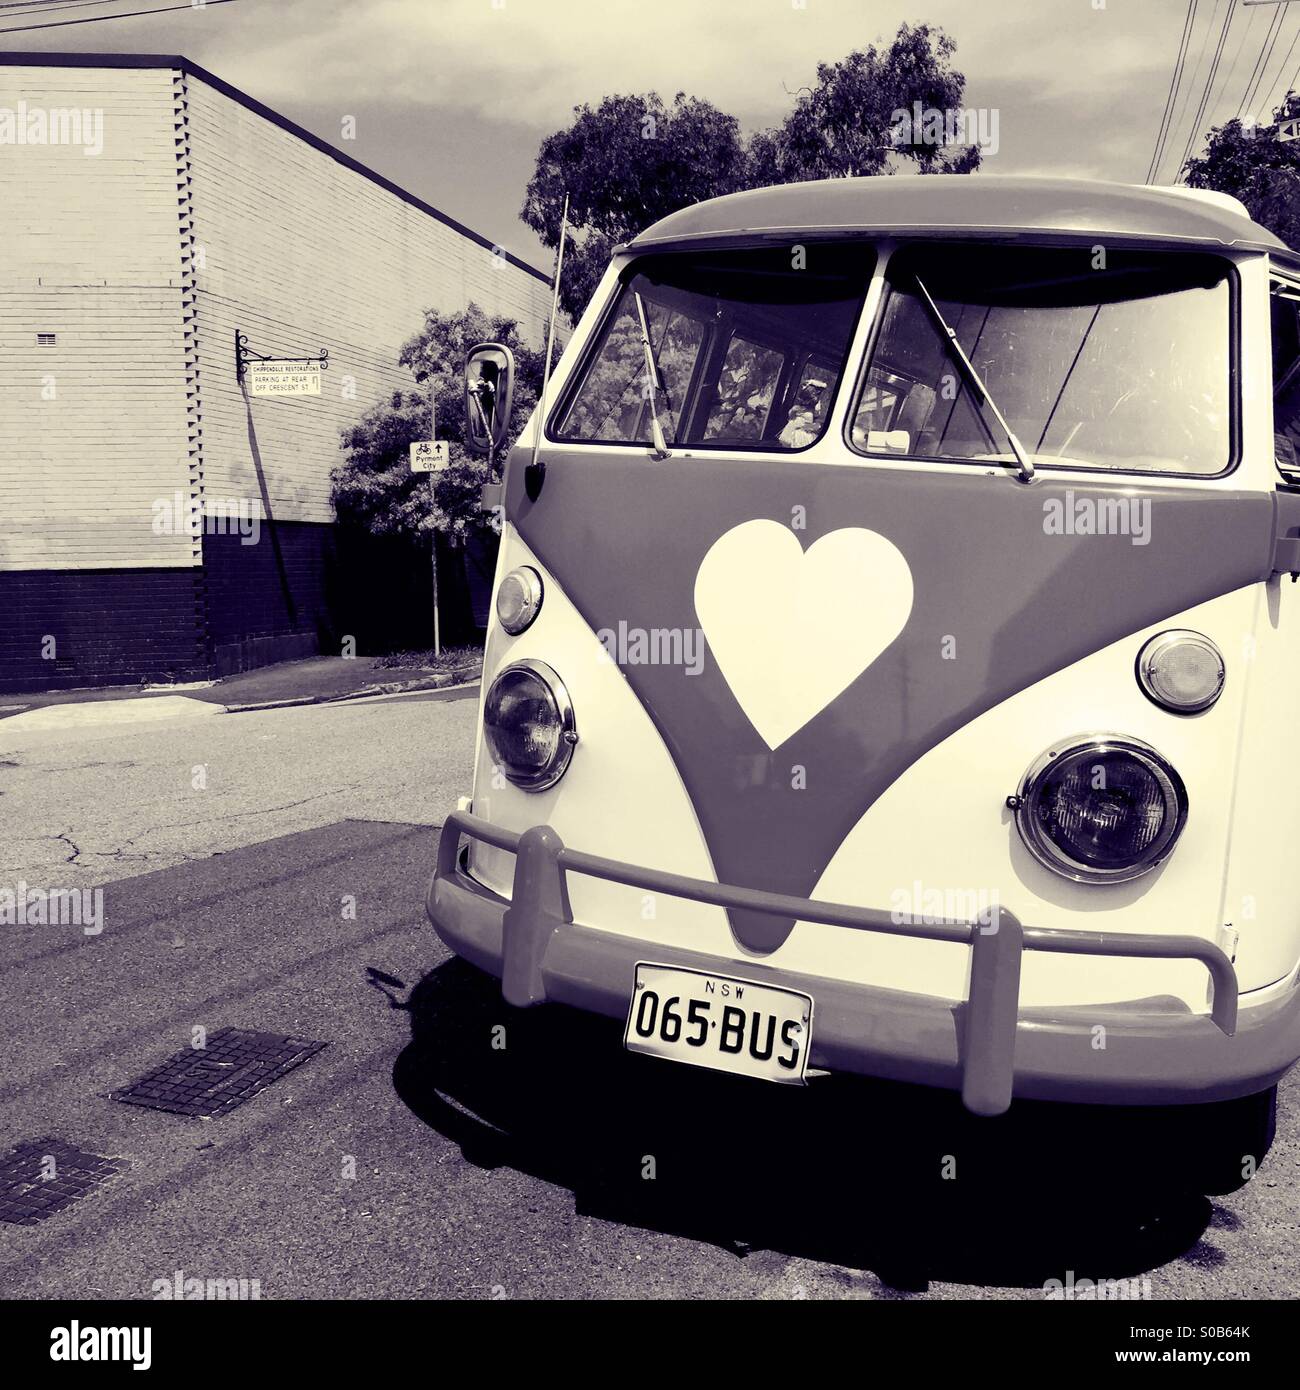 An old VW bus with a heart logo Stock Photo